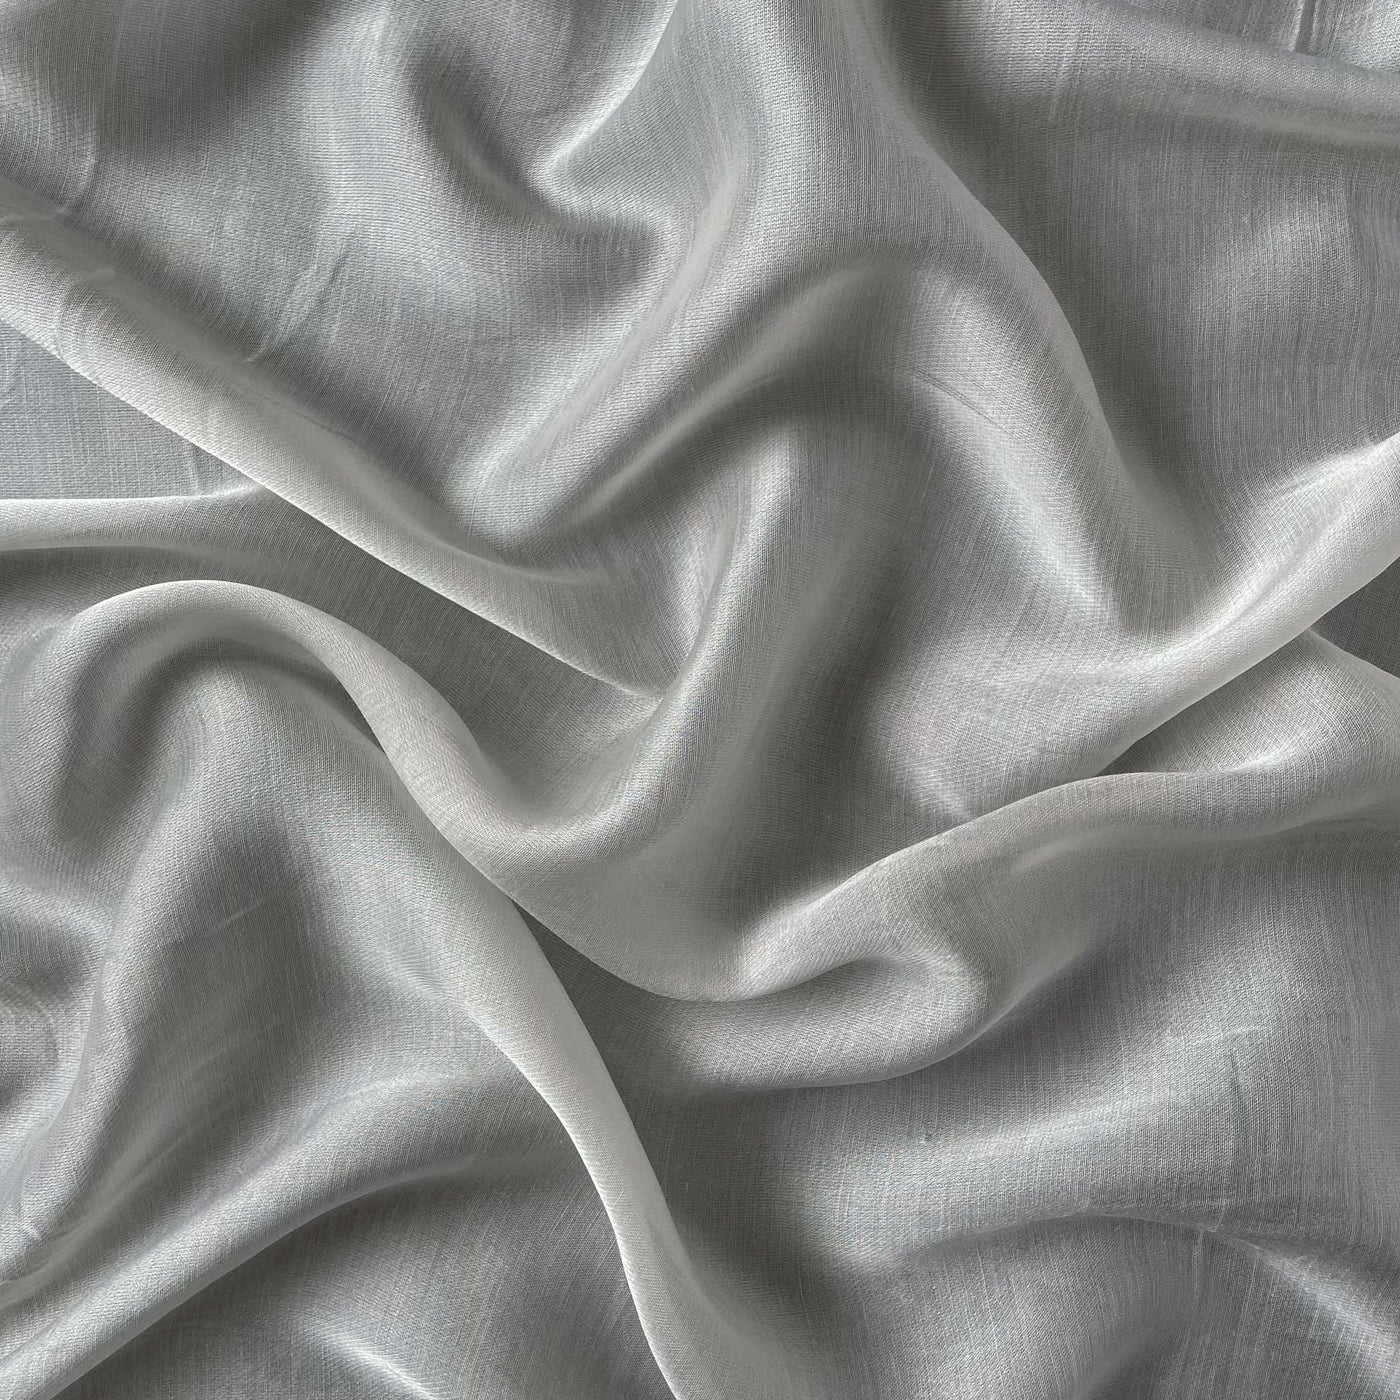 Fabric Pandit Fabric White Dyeable Pure Viscose Organza Satin Plain Fabric (Width 44 Inches, 92 Gms)